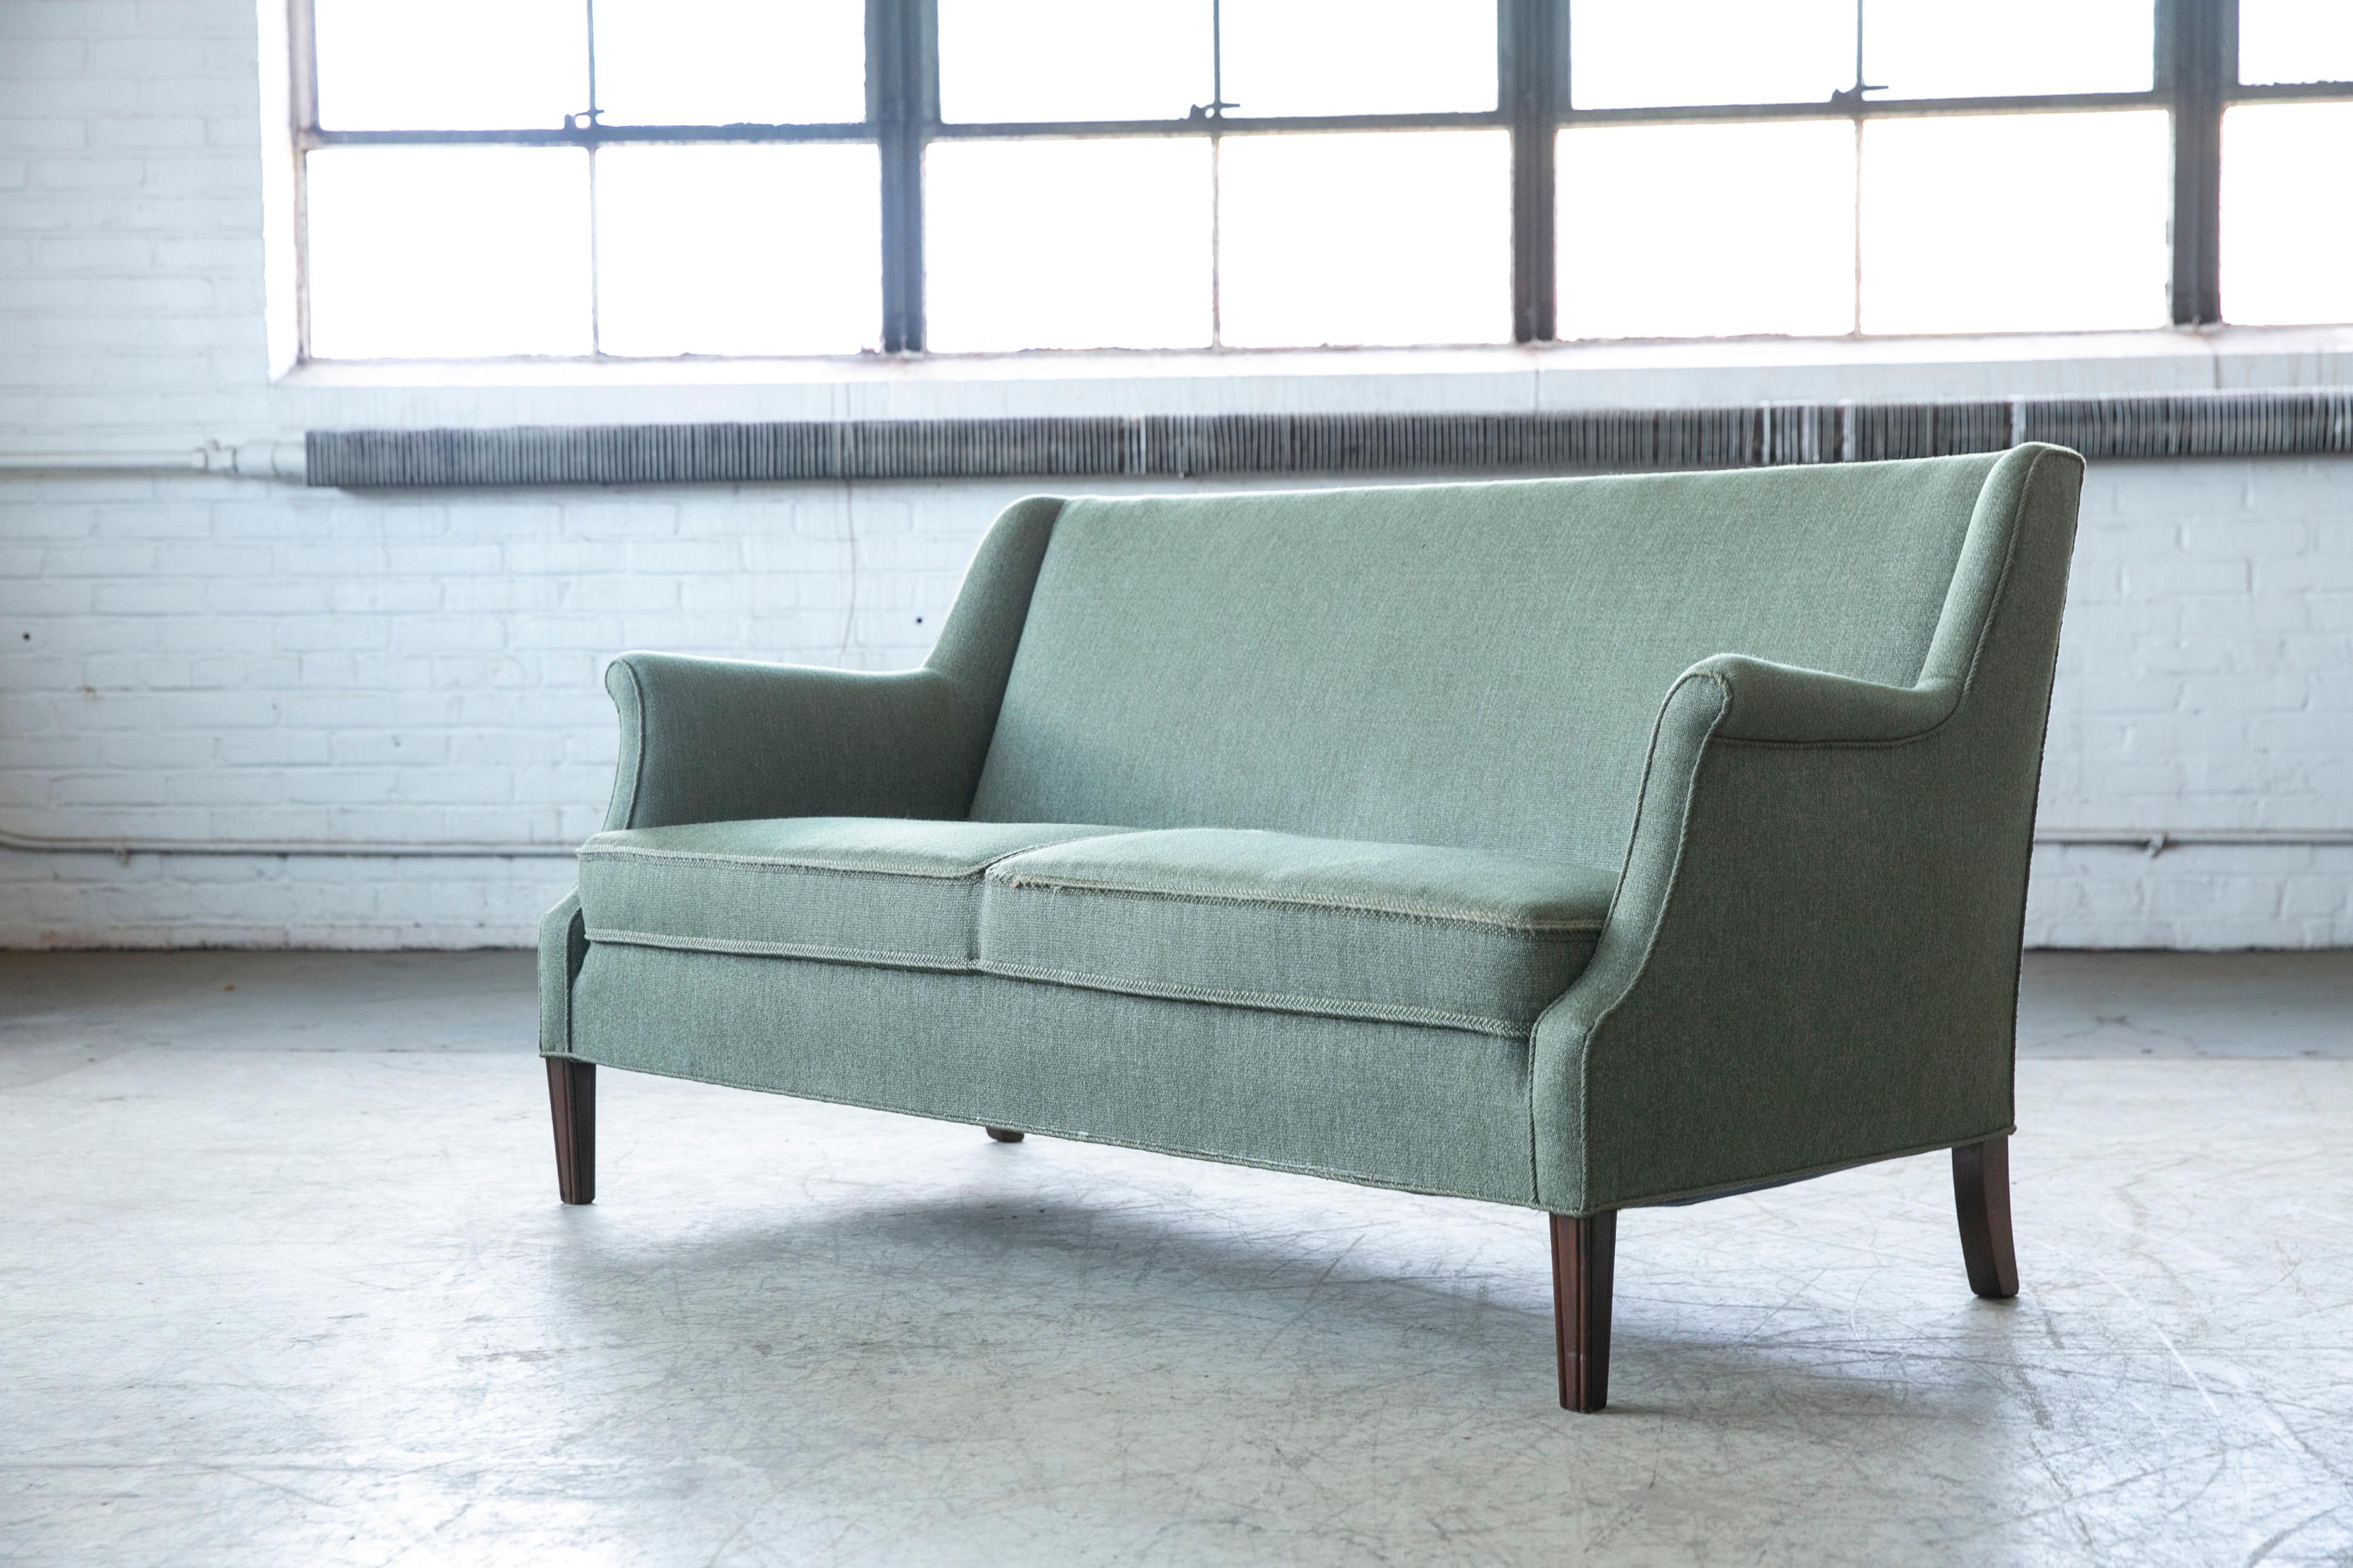 Classic Danish settee by the Master himself, Frits Henningsen. Very elegant and stylish yet simple and refined. Comfortable and supportive. Solid and sturdy design.
Upholstered at a later point in wool and while in still usable condition the fabric